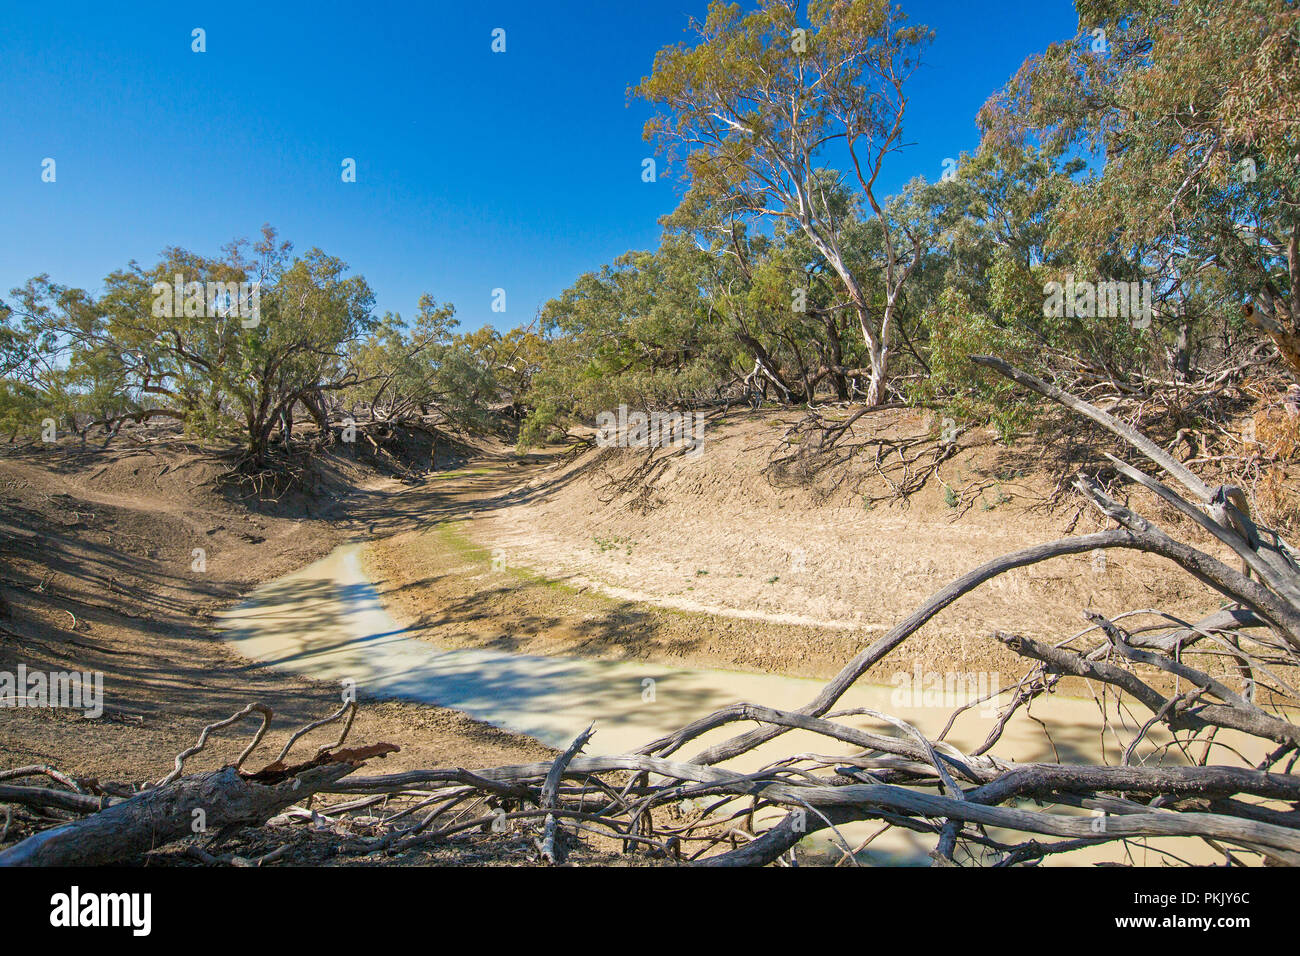 Culgoa River, merely a muddy puddle during drought, hemmed with tall trees, slicing through arid Australian outback landscape under blue sky in NSW Stock Photo